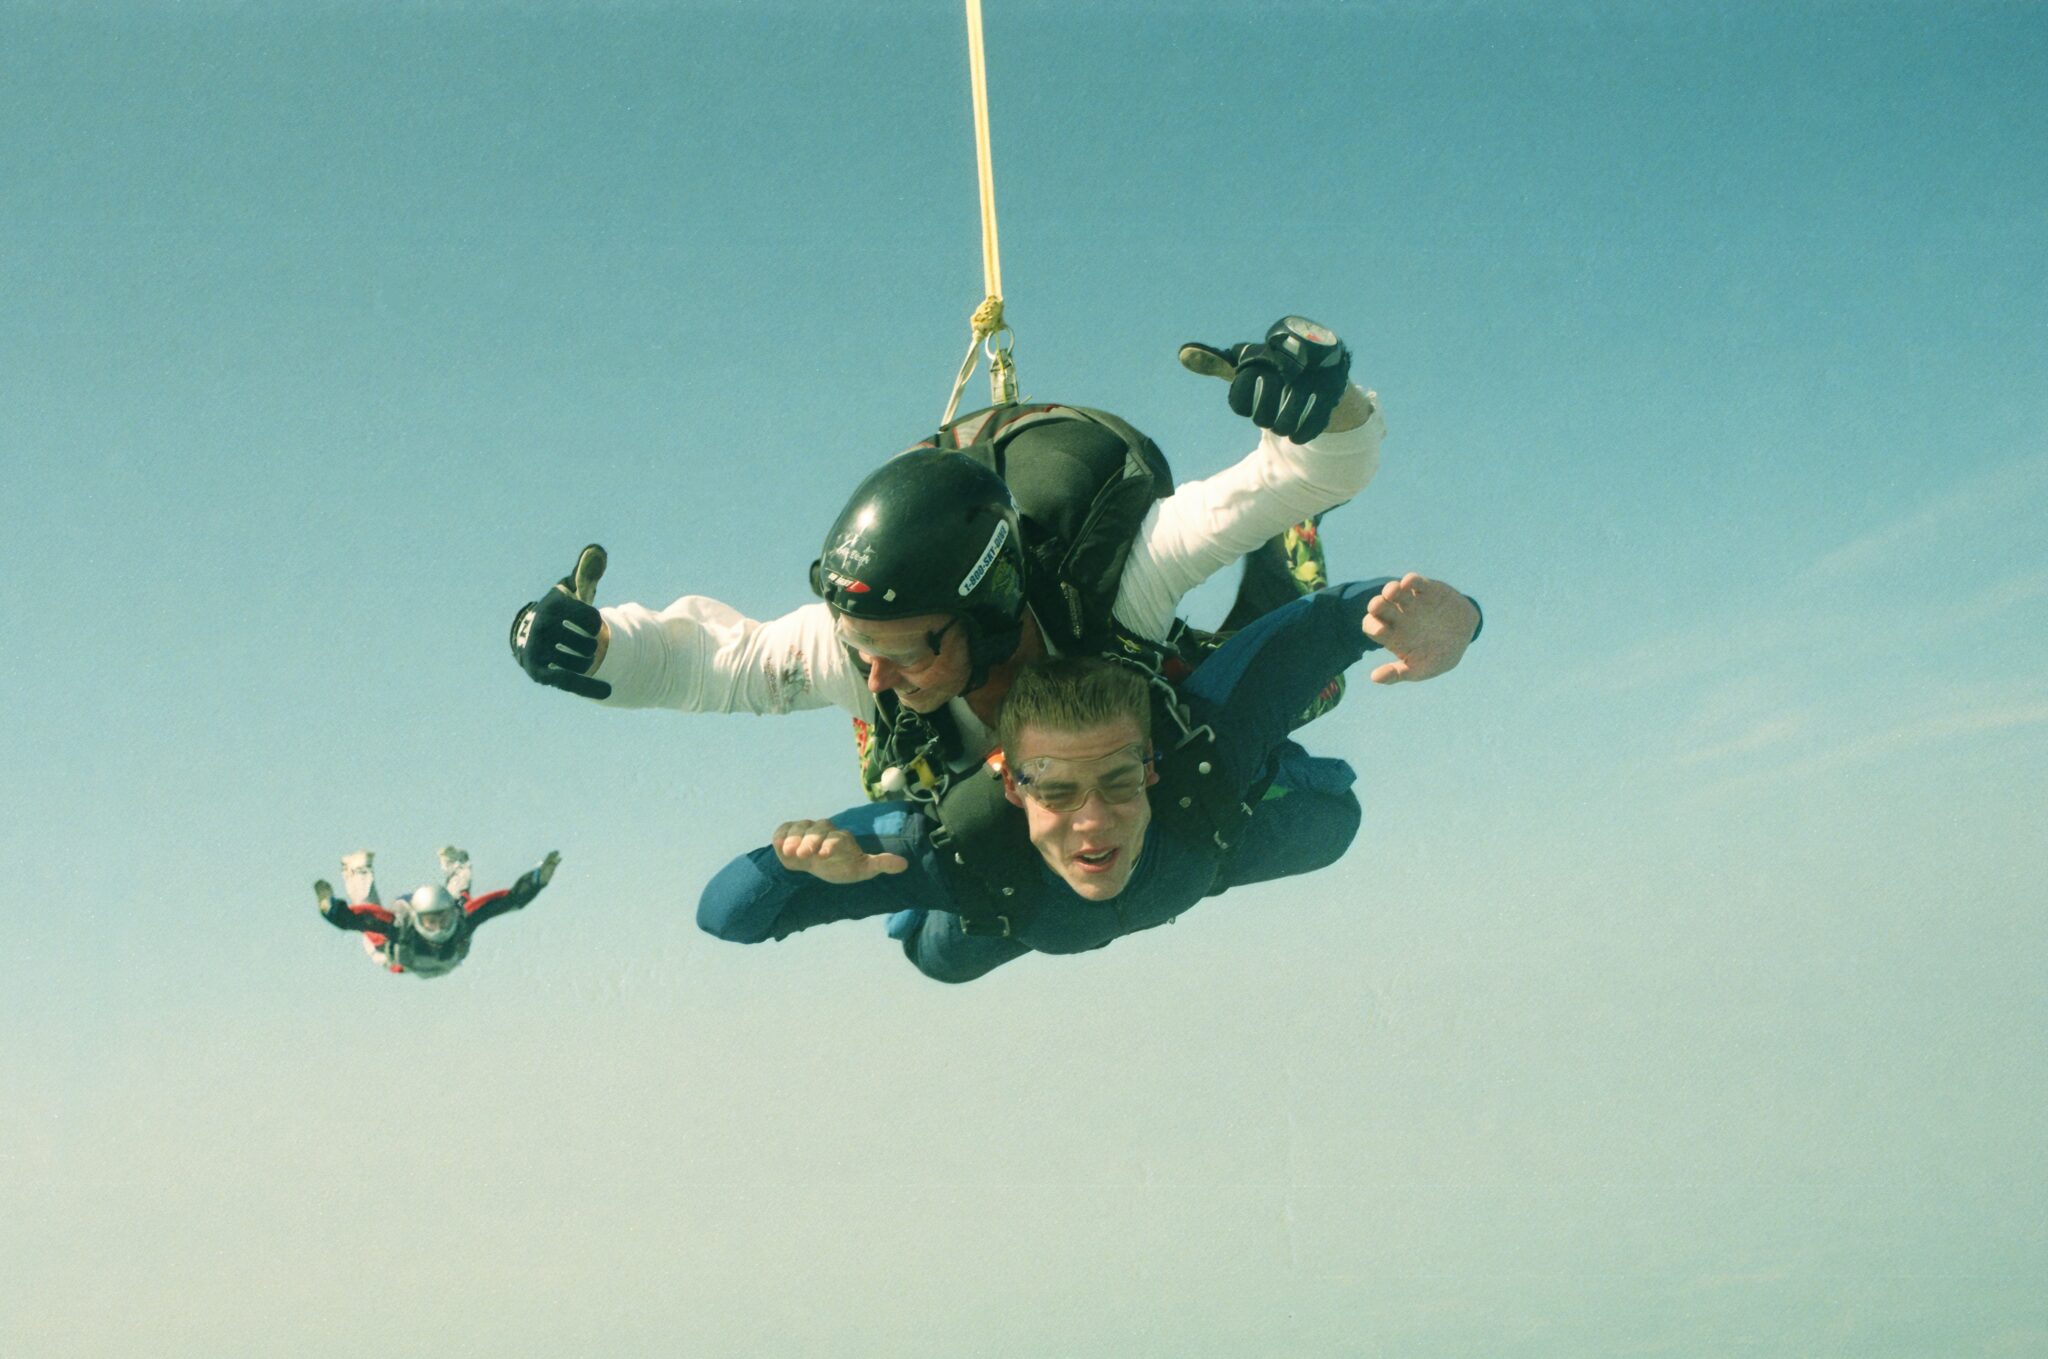 two men skydive in tandem from an airplane